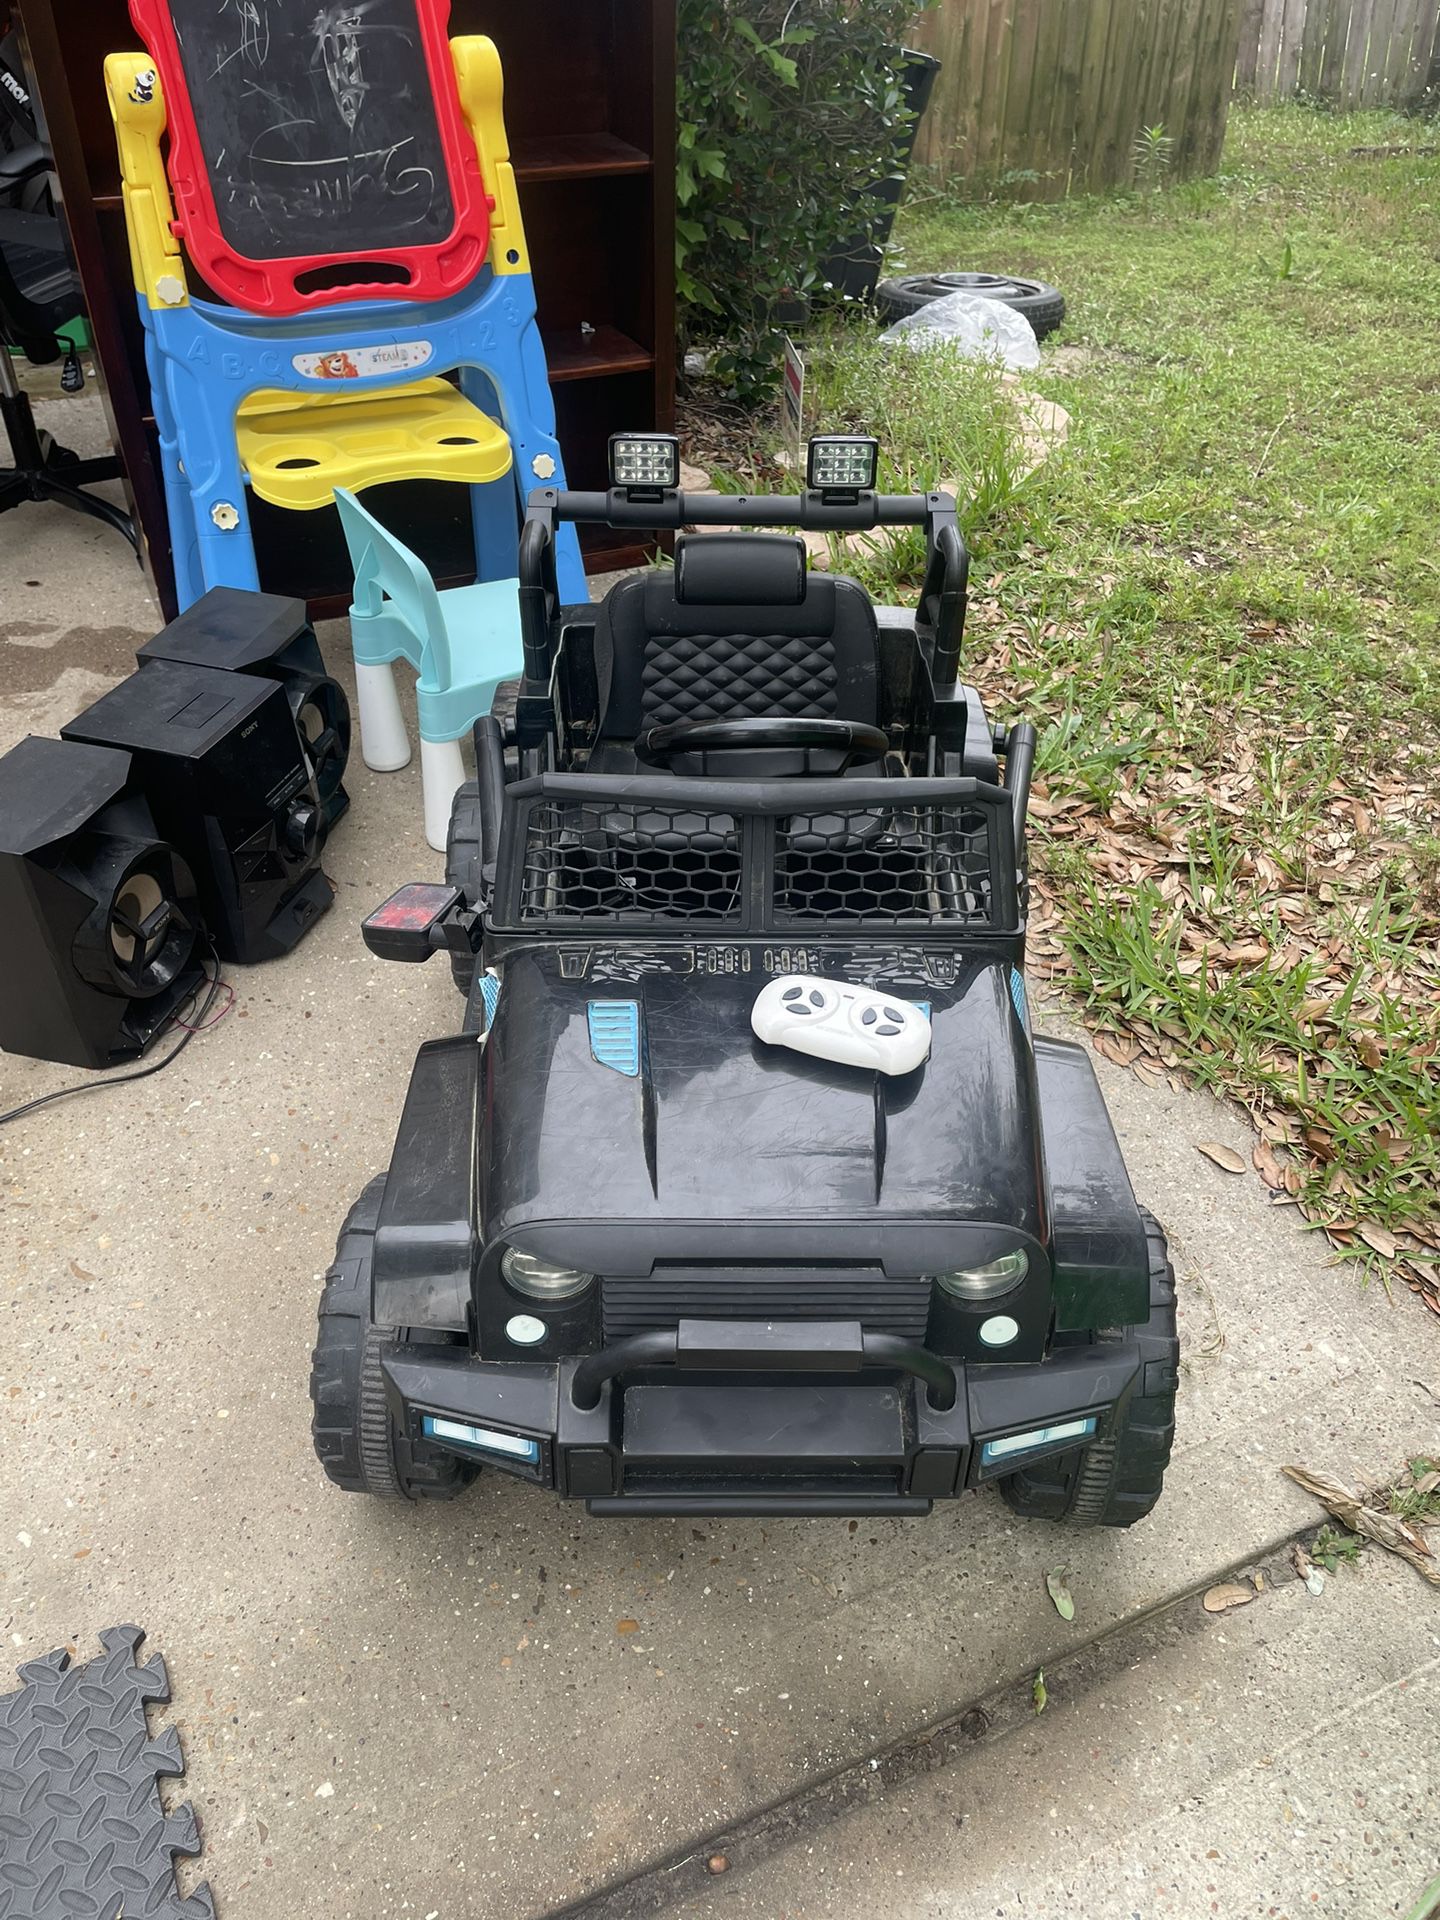 Toddler Toy Jeep 